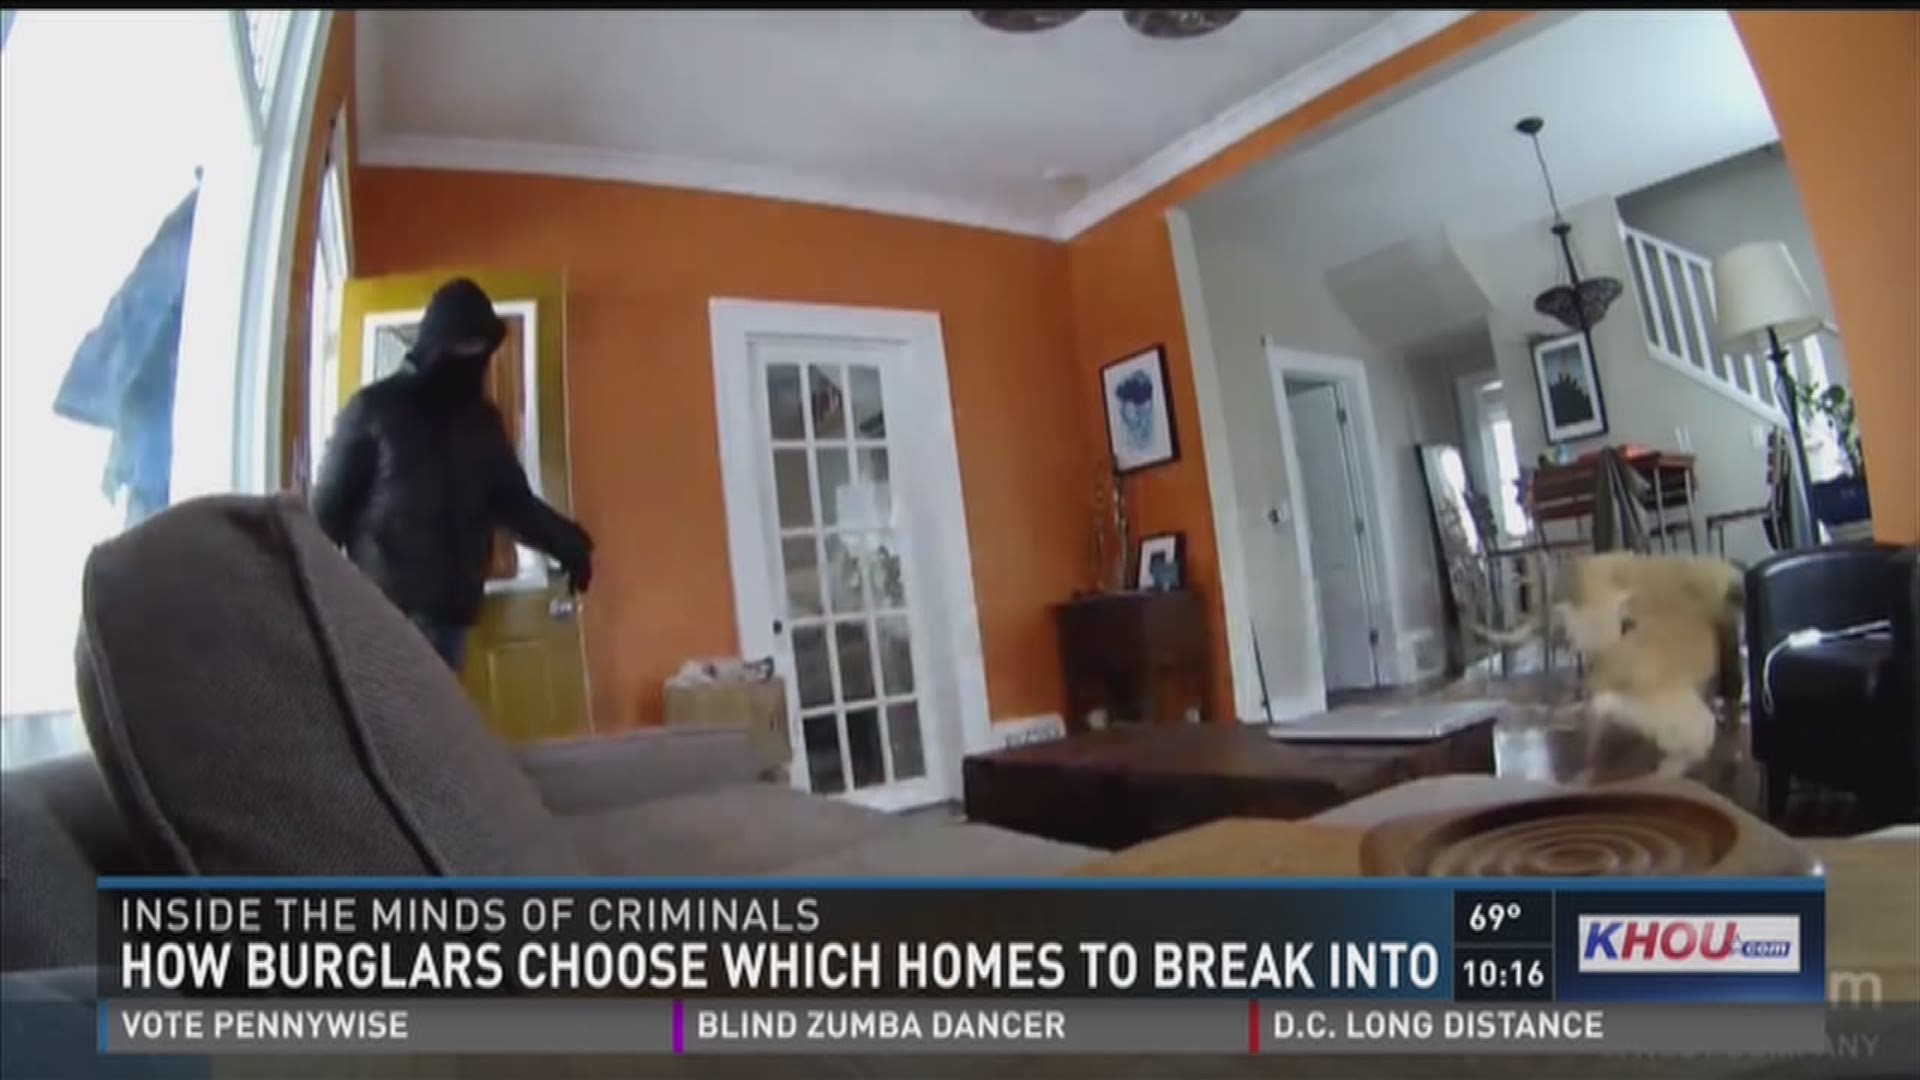 Do you ever wonder whether your home security system or "Beware of Dog" sign actually keeps burglars away?